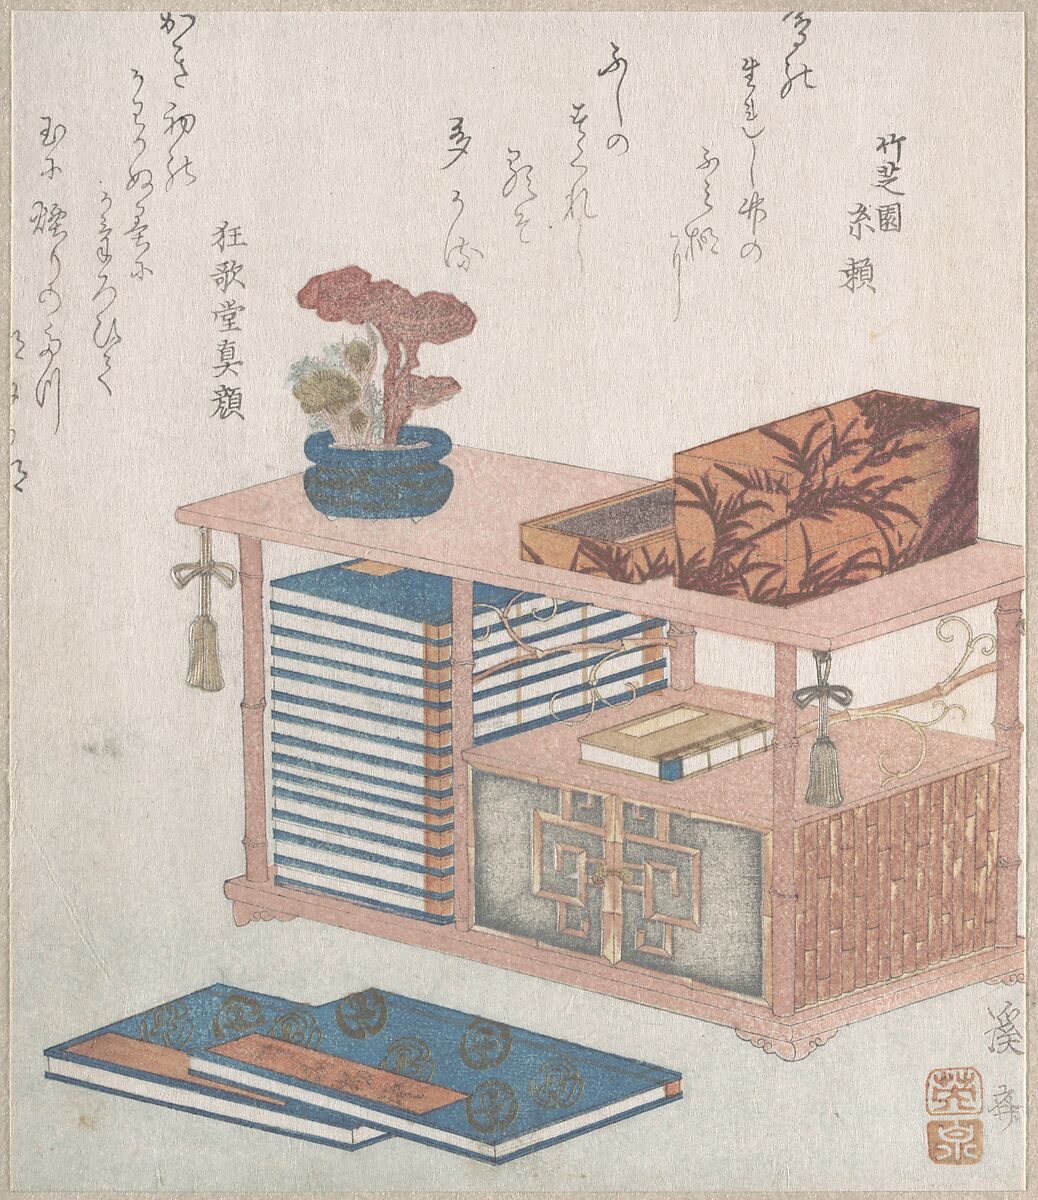 Books and a Bookcase, Keisai Eisen (Japanese, 1790–1848), Part of an album of woodblock prints (surimono); ink and color on paper, Japan 